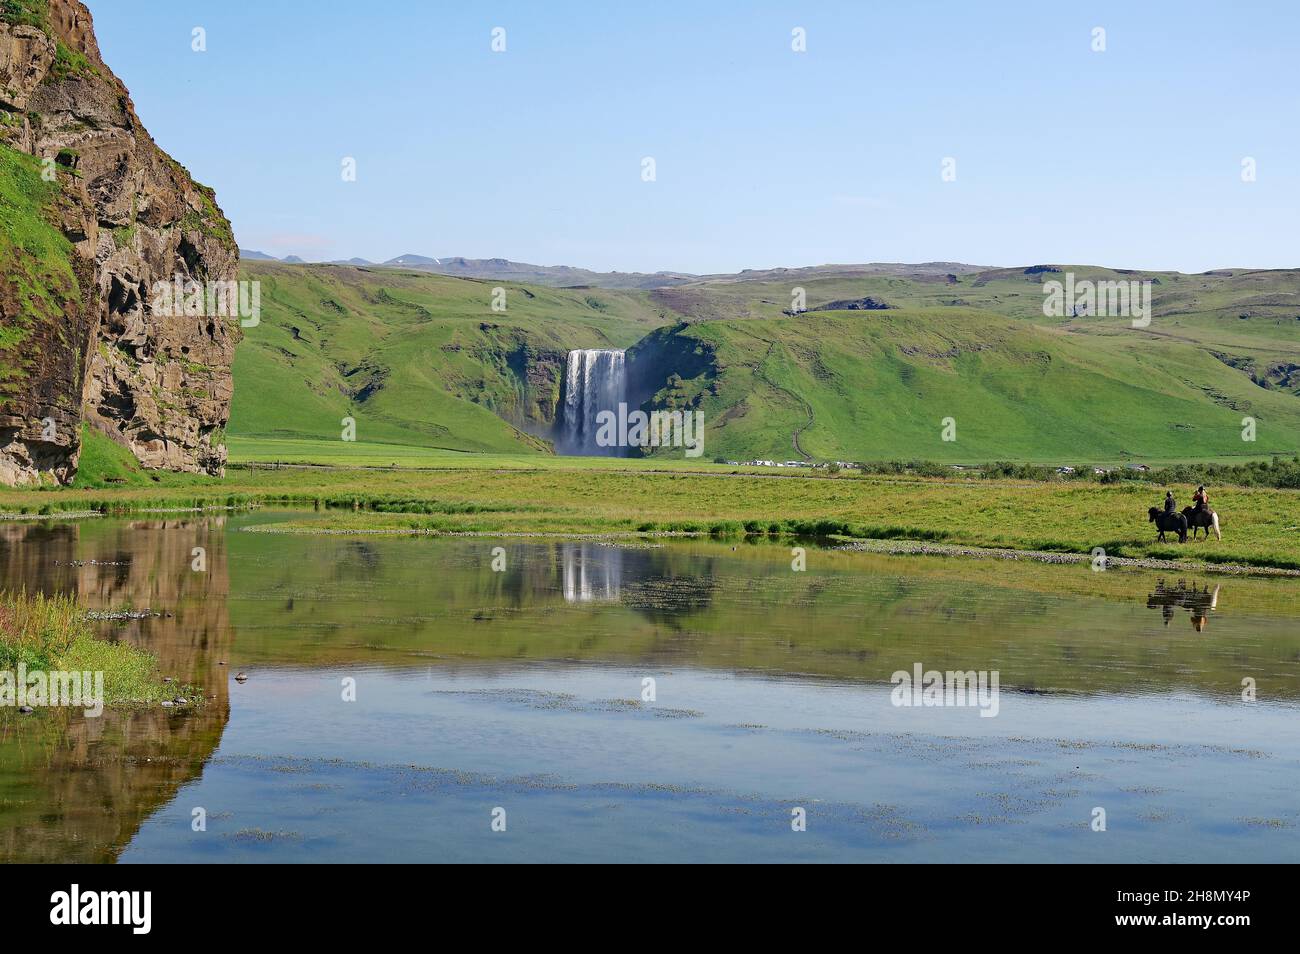 Water masses plummeting vertically into the depths, reflection in the water, green landscape, two riders on Icelandic horses, Skogafoss, Iceland Stock Photo